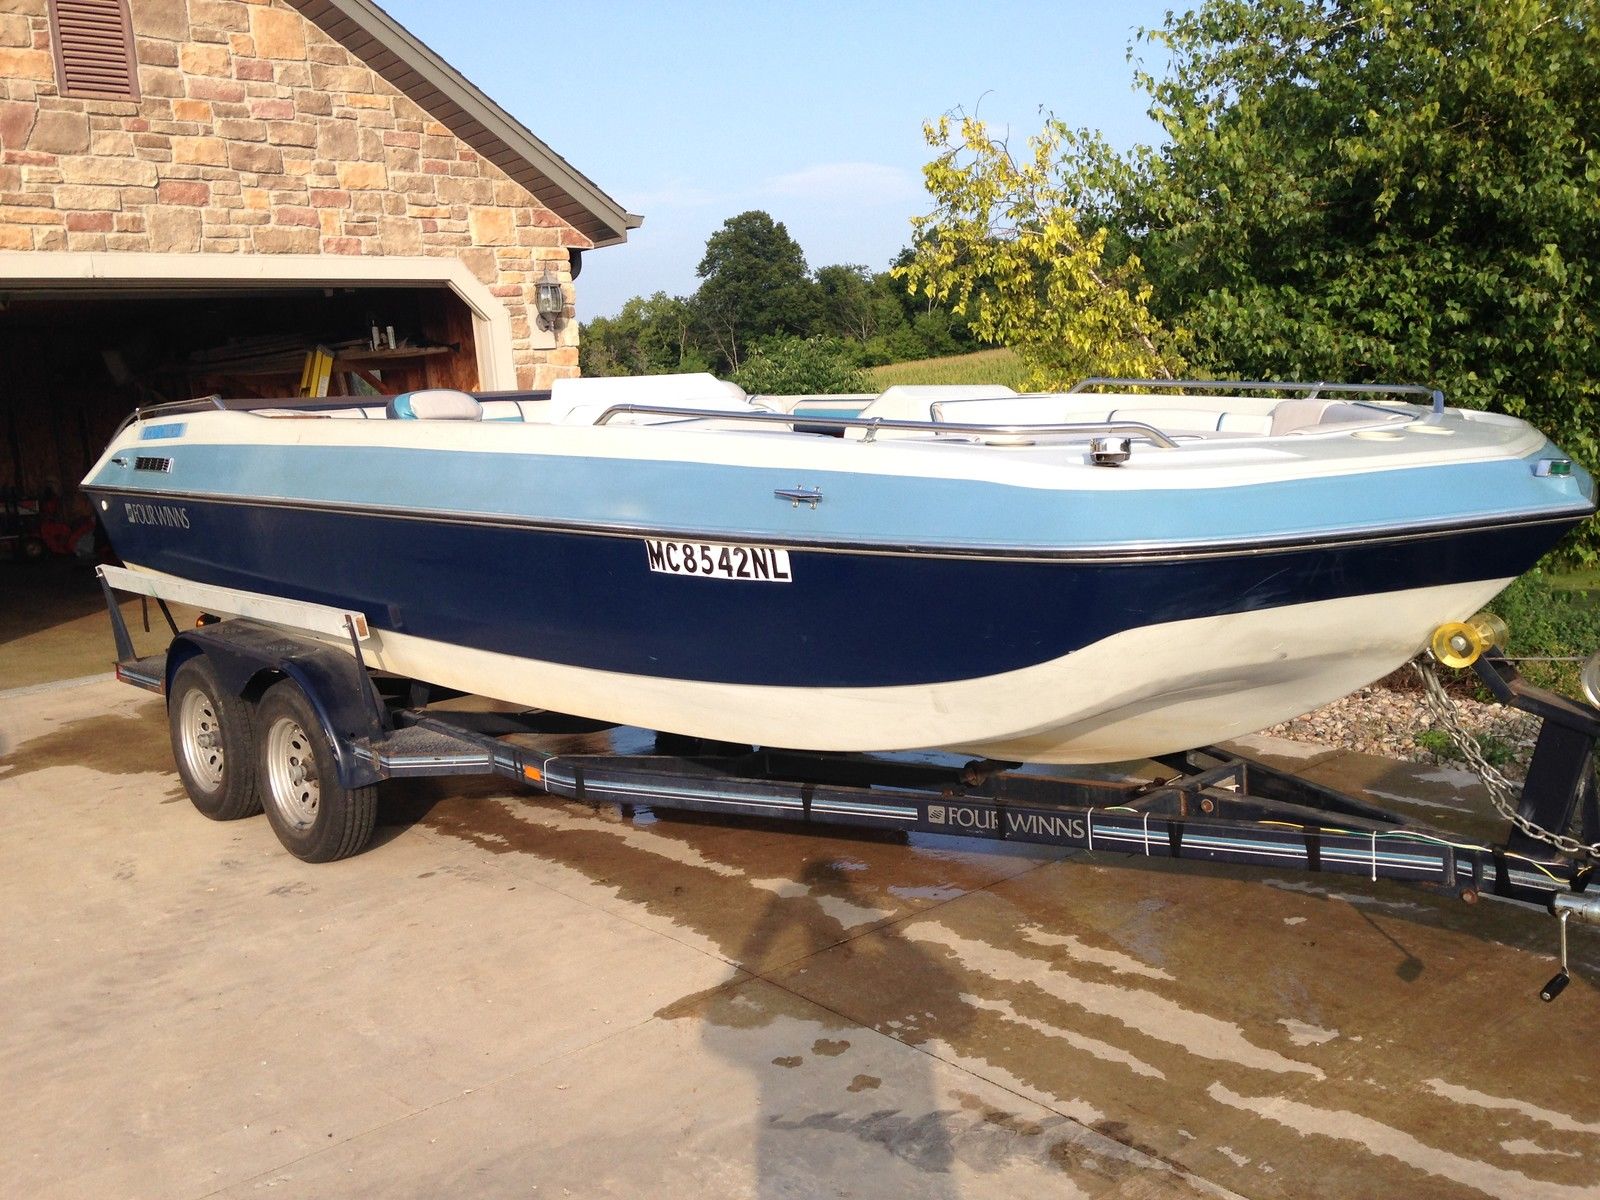 Four Winns 200 CANDIA 1988 for sale for $2,500 - Boats 